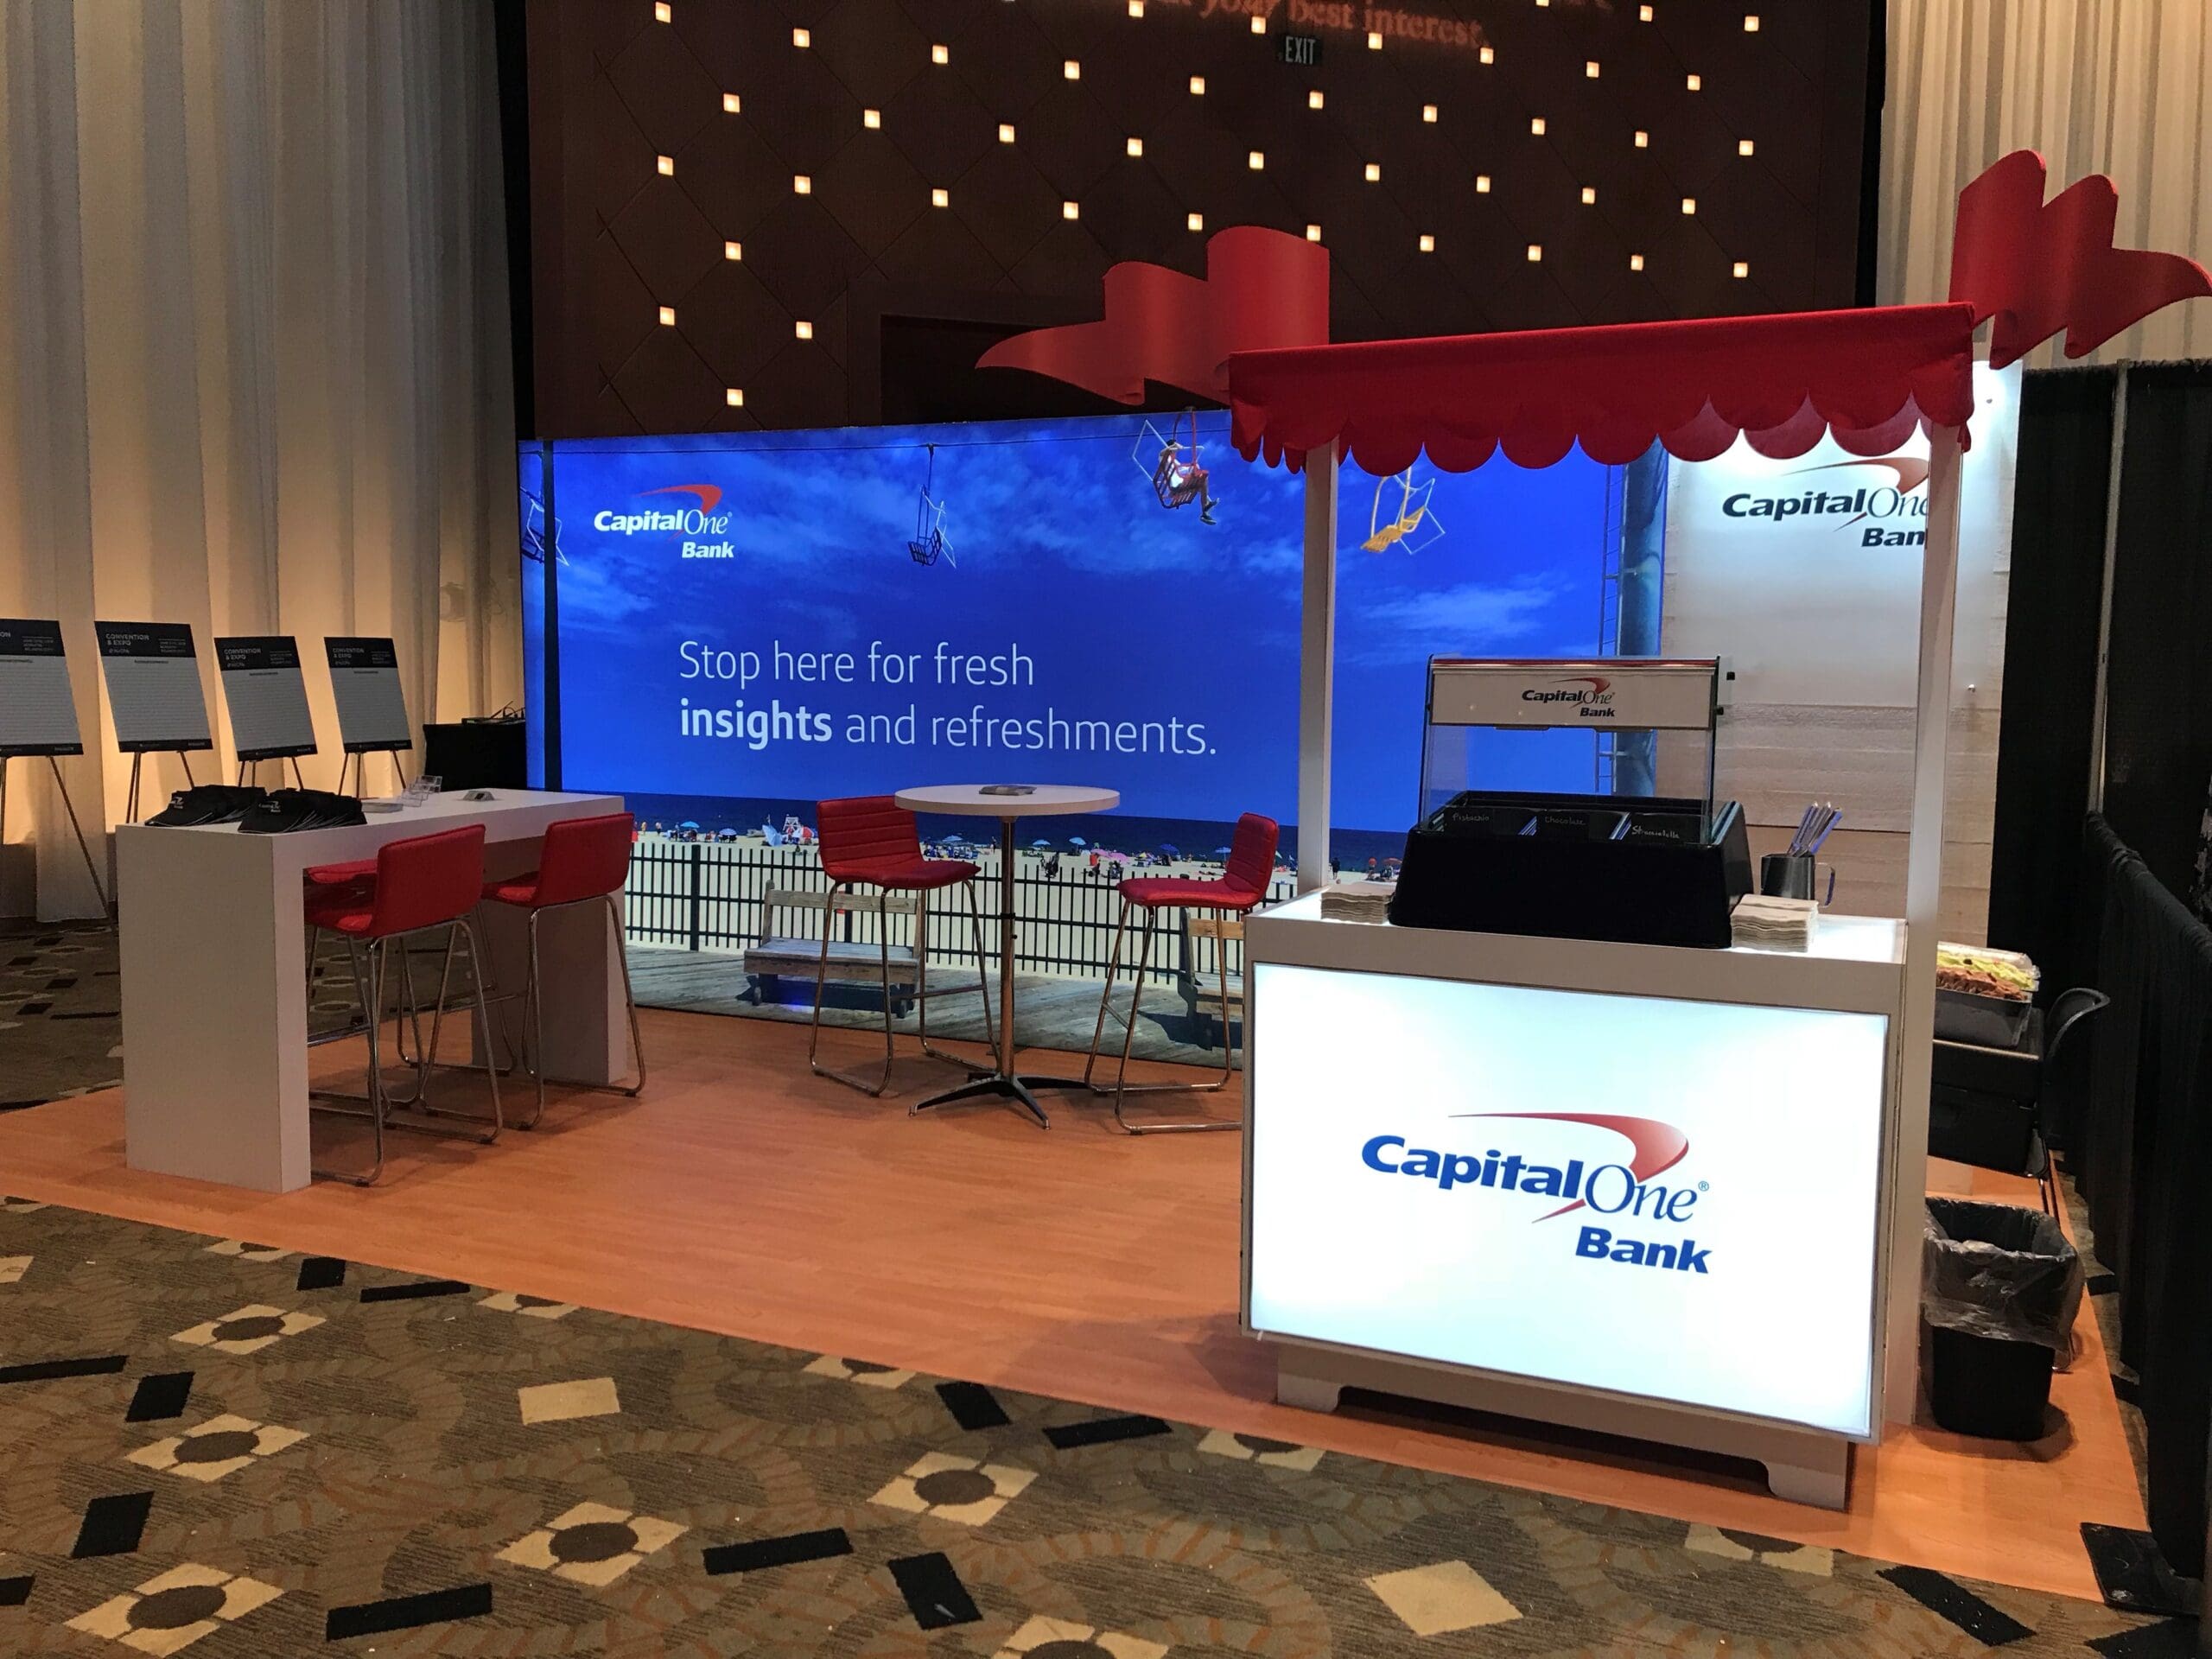 A beach themed trade show booth created by Cardinal Expo for Capital One Bank. It features an LED wall with a boardwalk scene and a kiosk for serving ice cream.